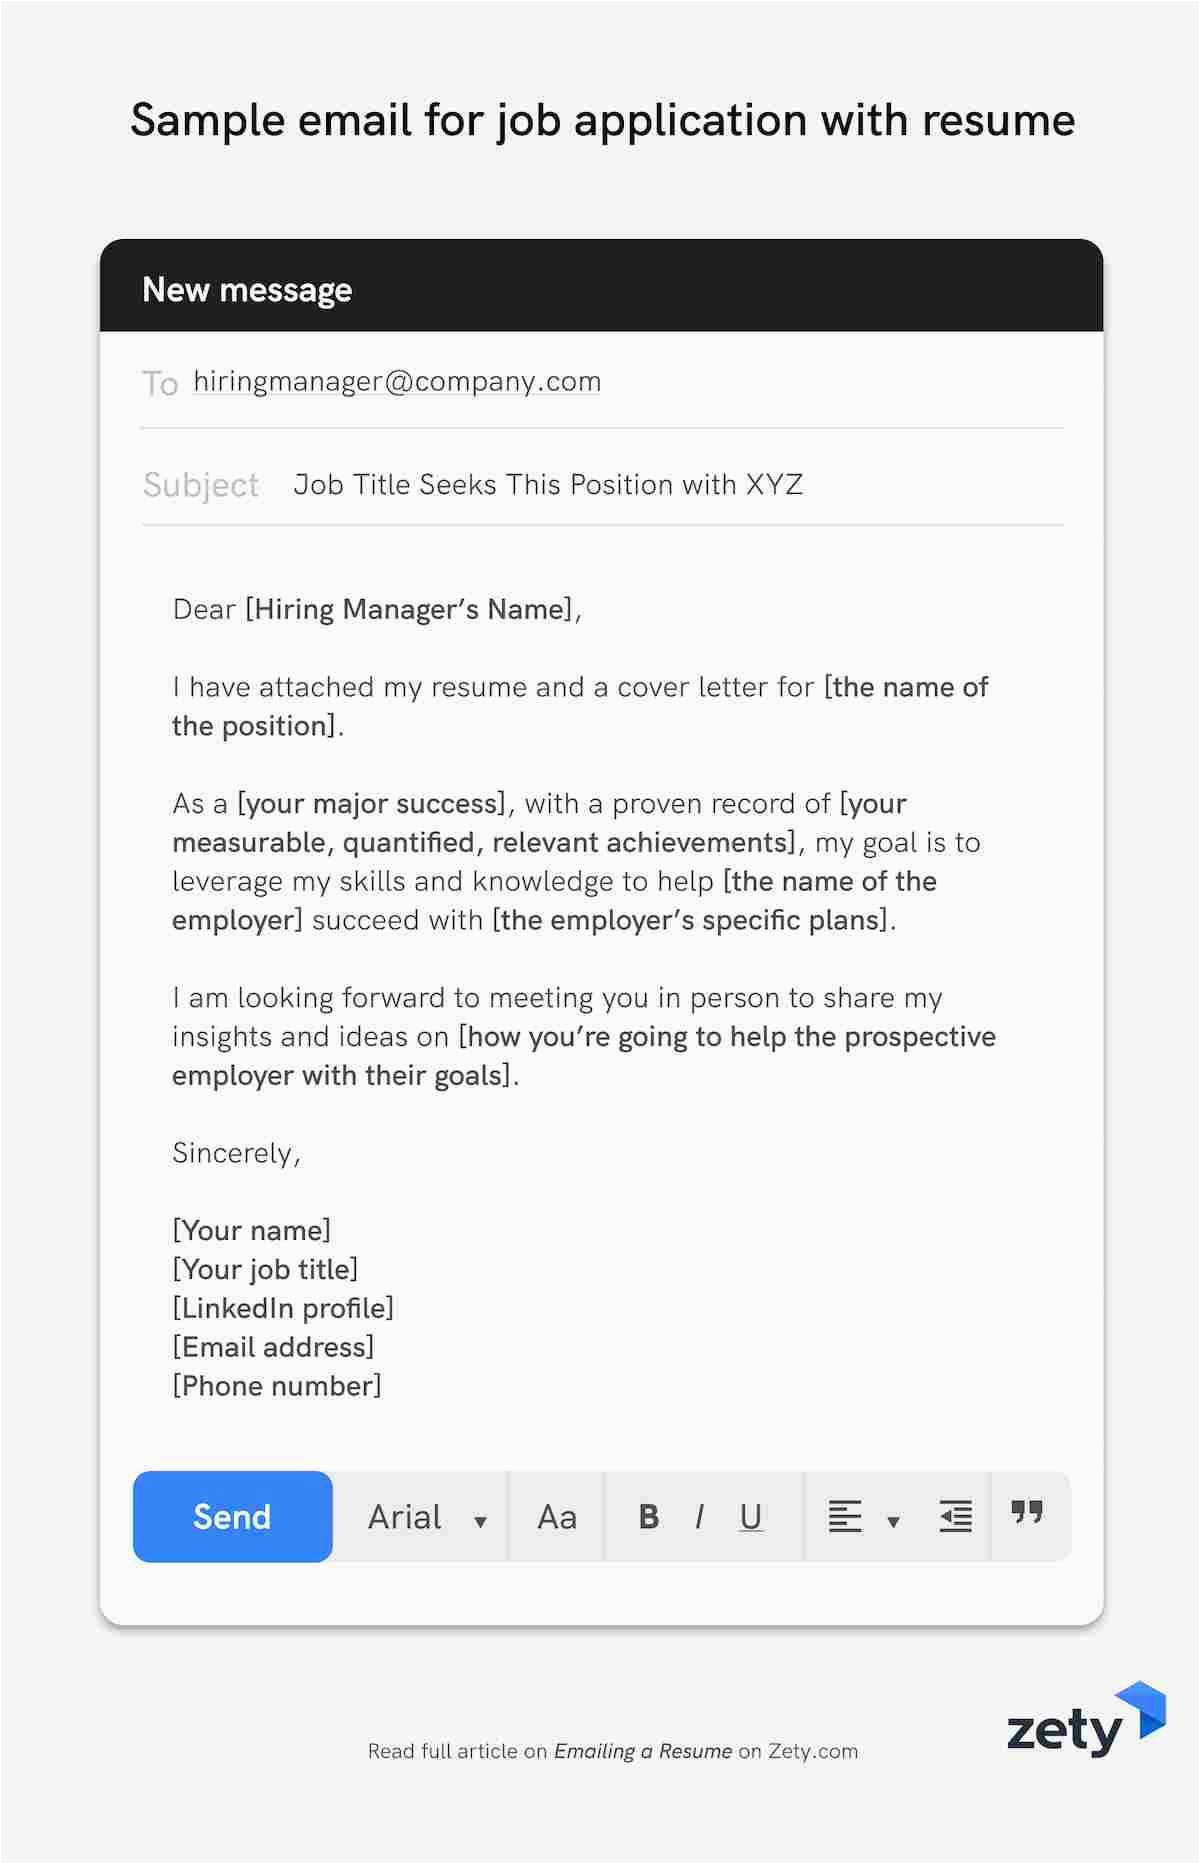 Sample Mail for Sending Resume to Company How to Email A Resume and Cover Letter to An Employer